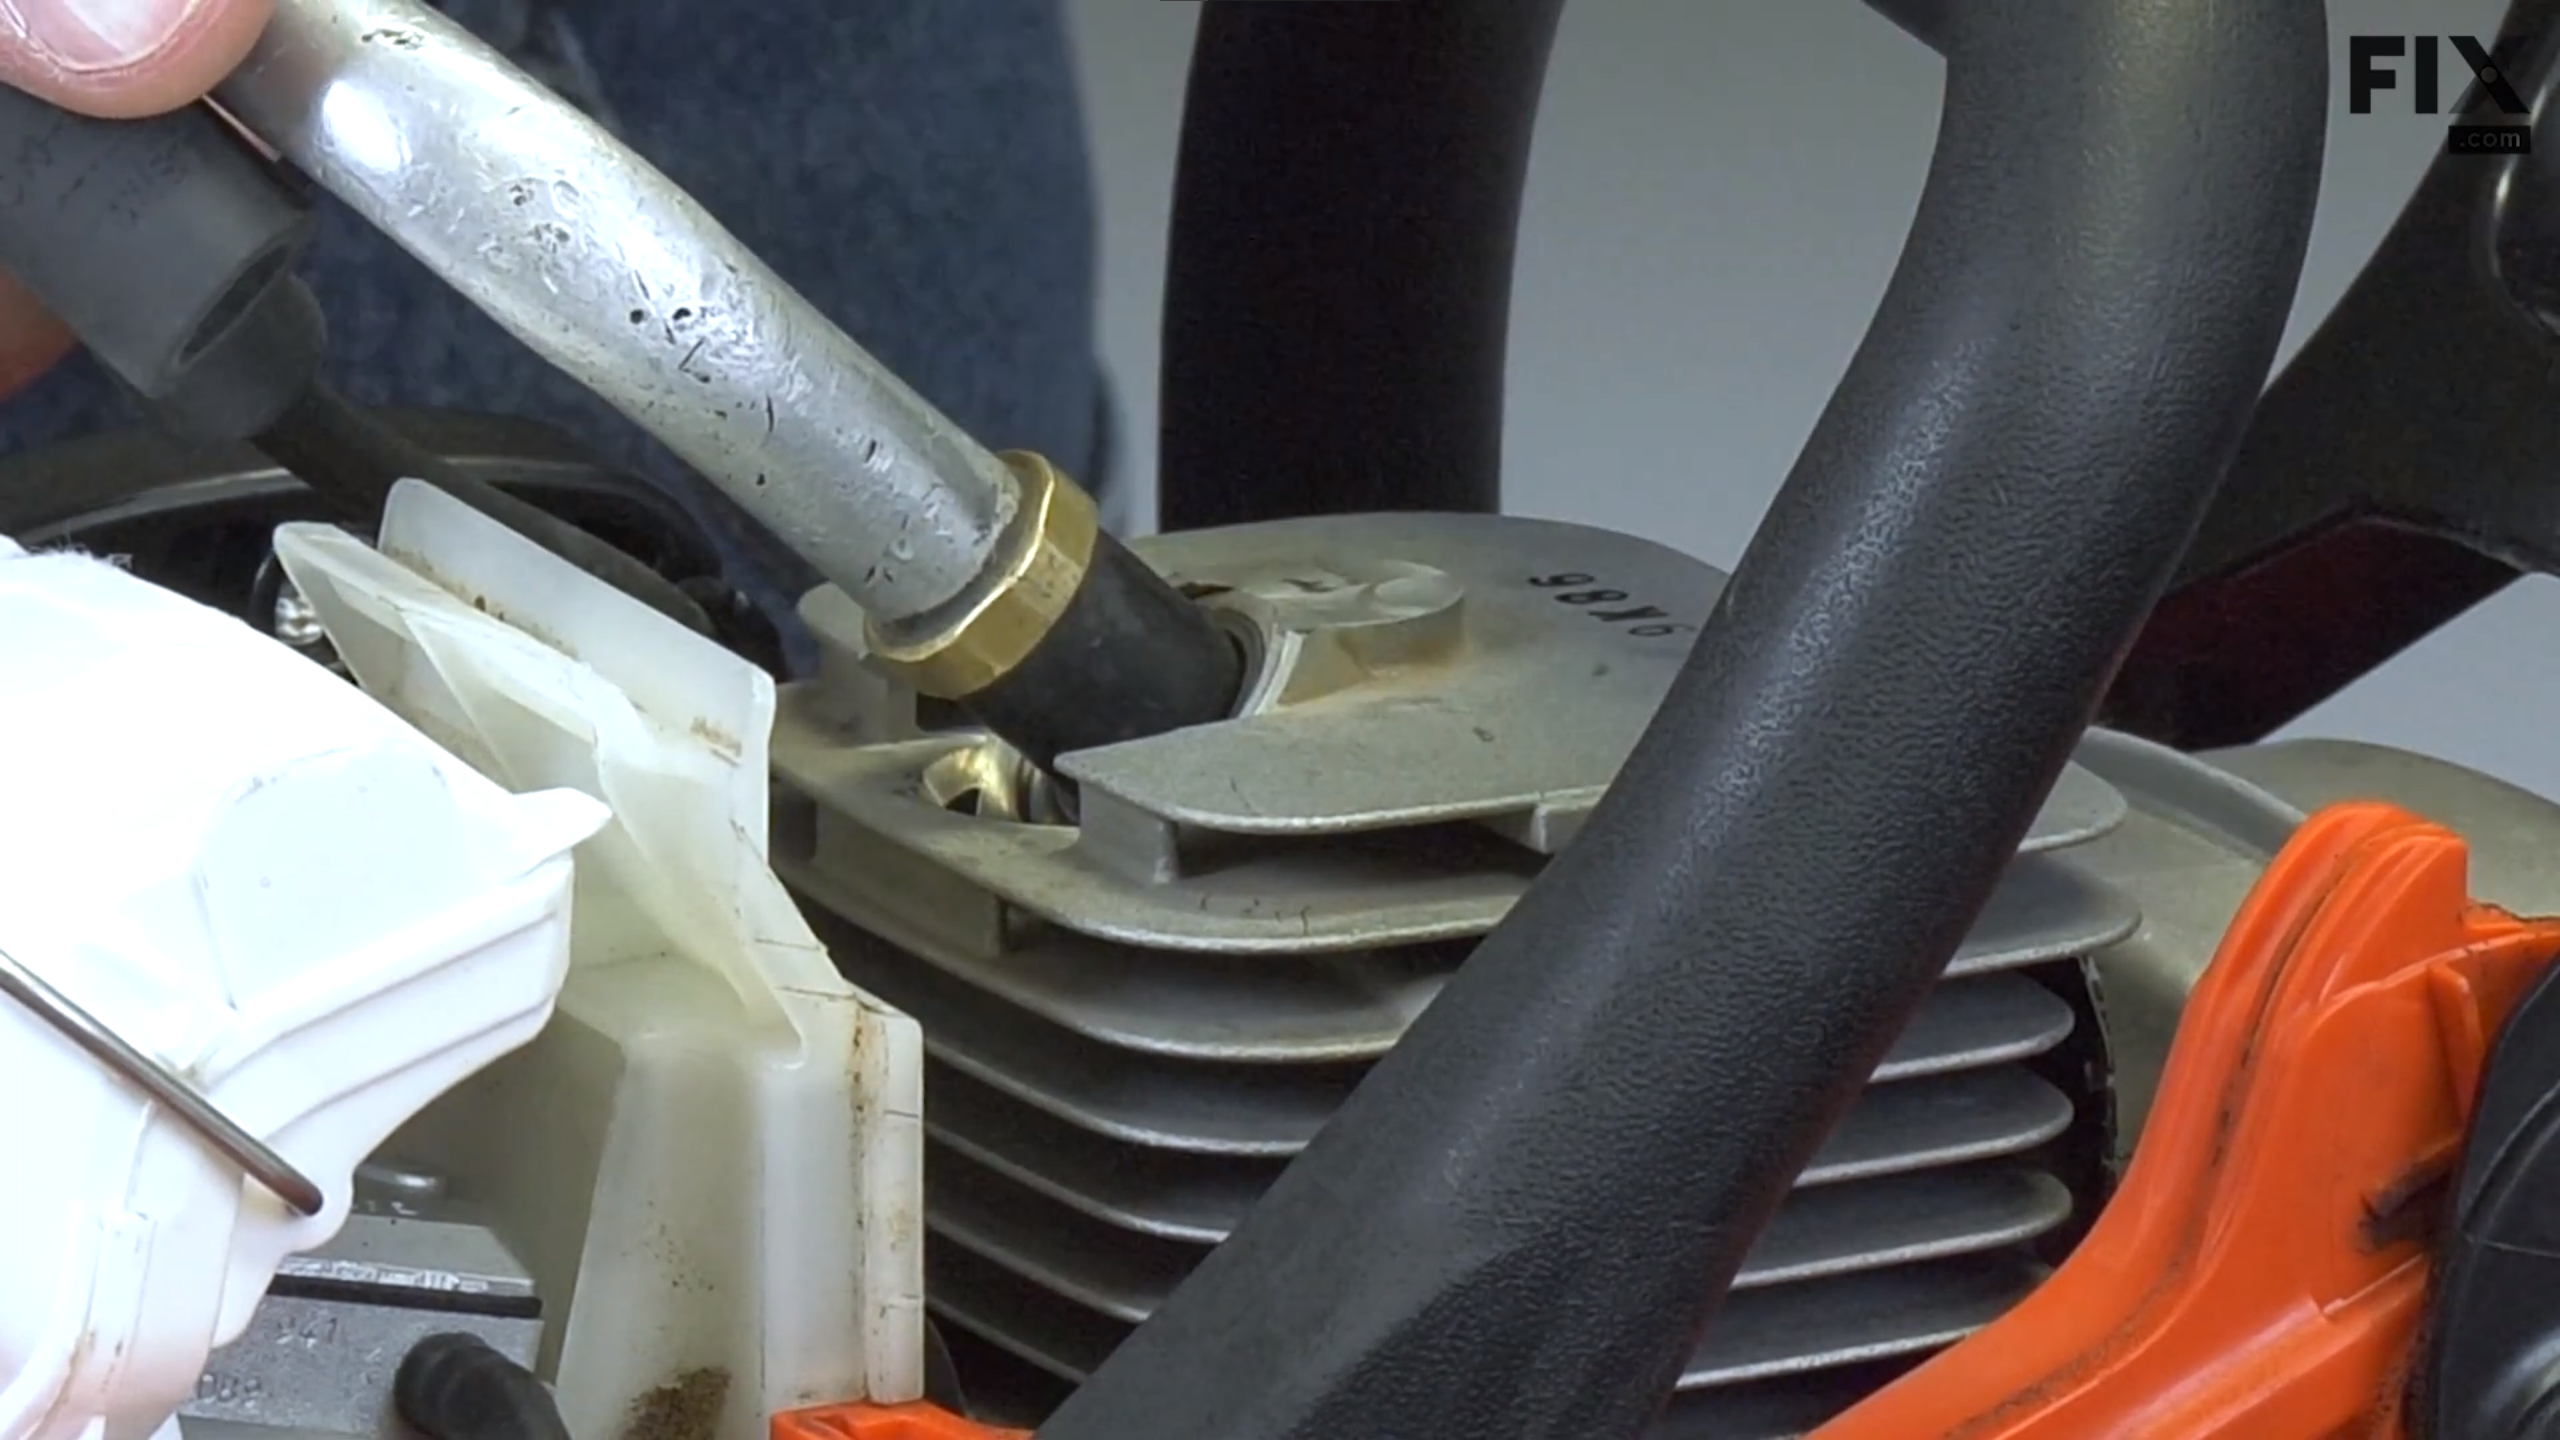 With compressed air, you can blow the excess fuel out of the engine to give the chainsaw engine a chance to start.